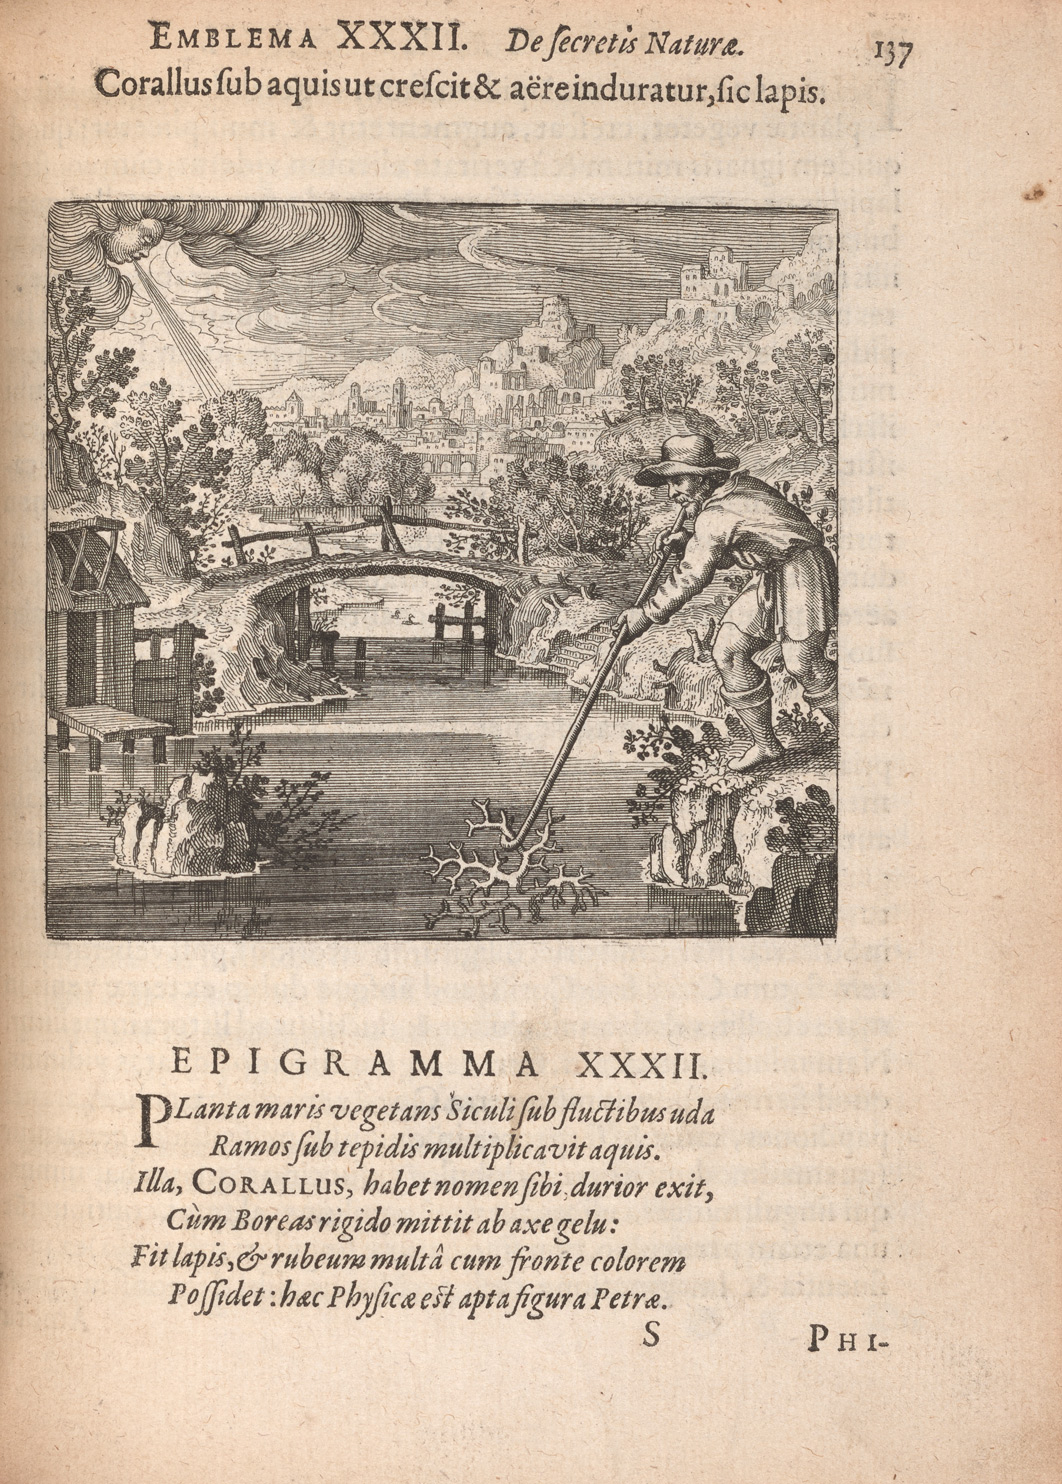 The second page of emblem 32 of Atalanta fugiens, which shows a motto and epigram in Latin and an image. In the image, a man in early modern clothing is trawling for coral with a hook in a bog. There is a dock, small house, and bridge behind him. In the sky a face in a cloud, understood as a wind god, is blowing wind.